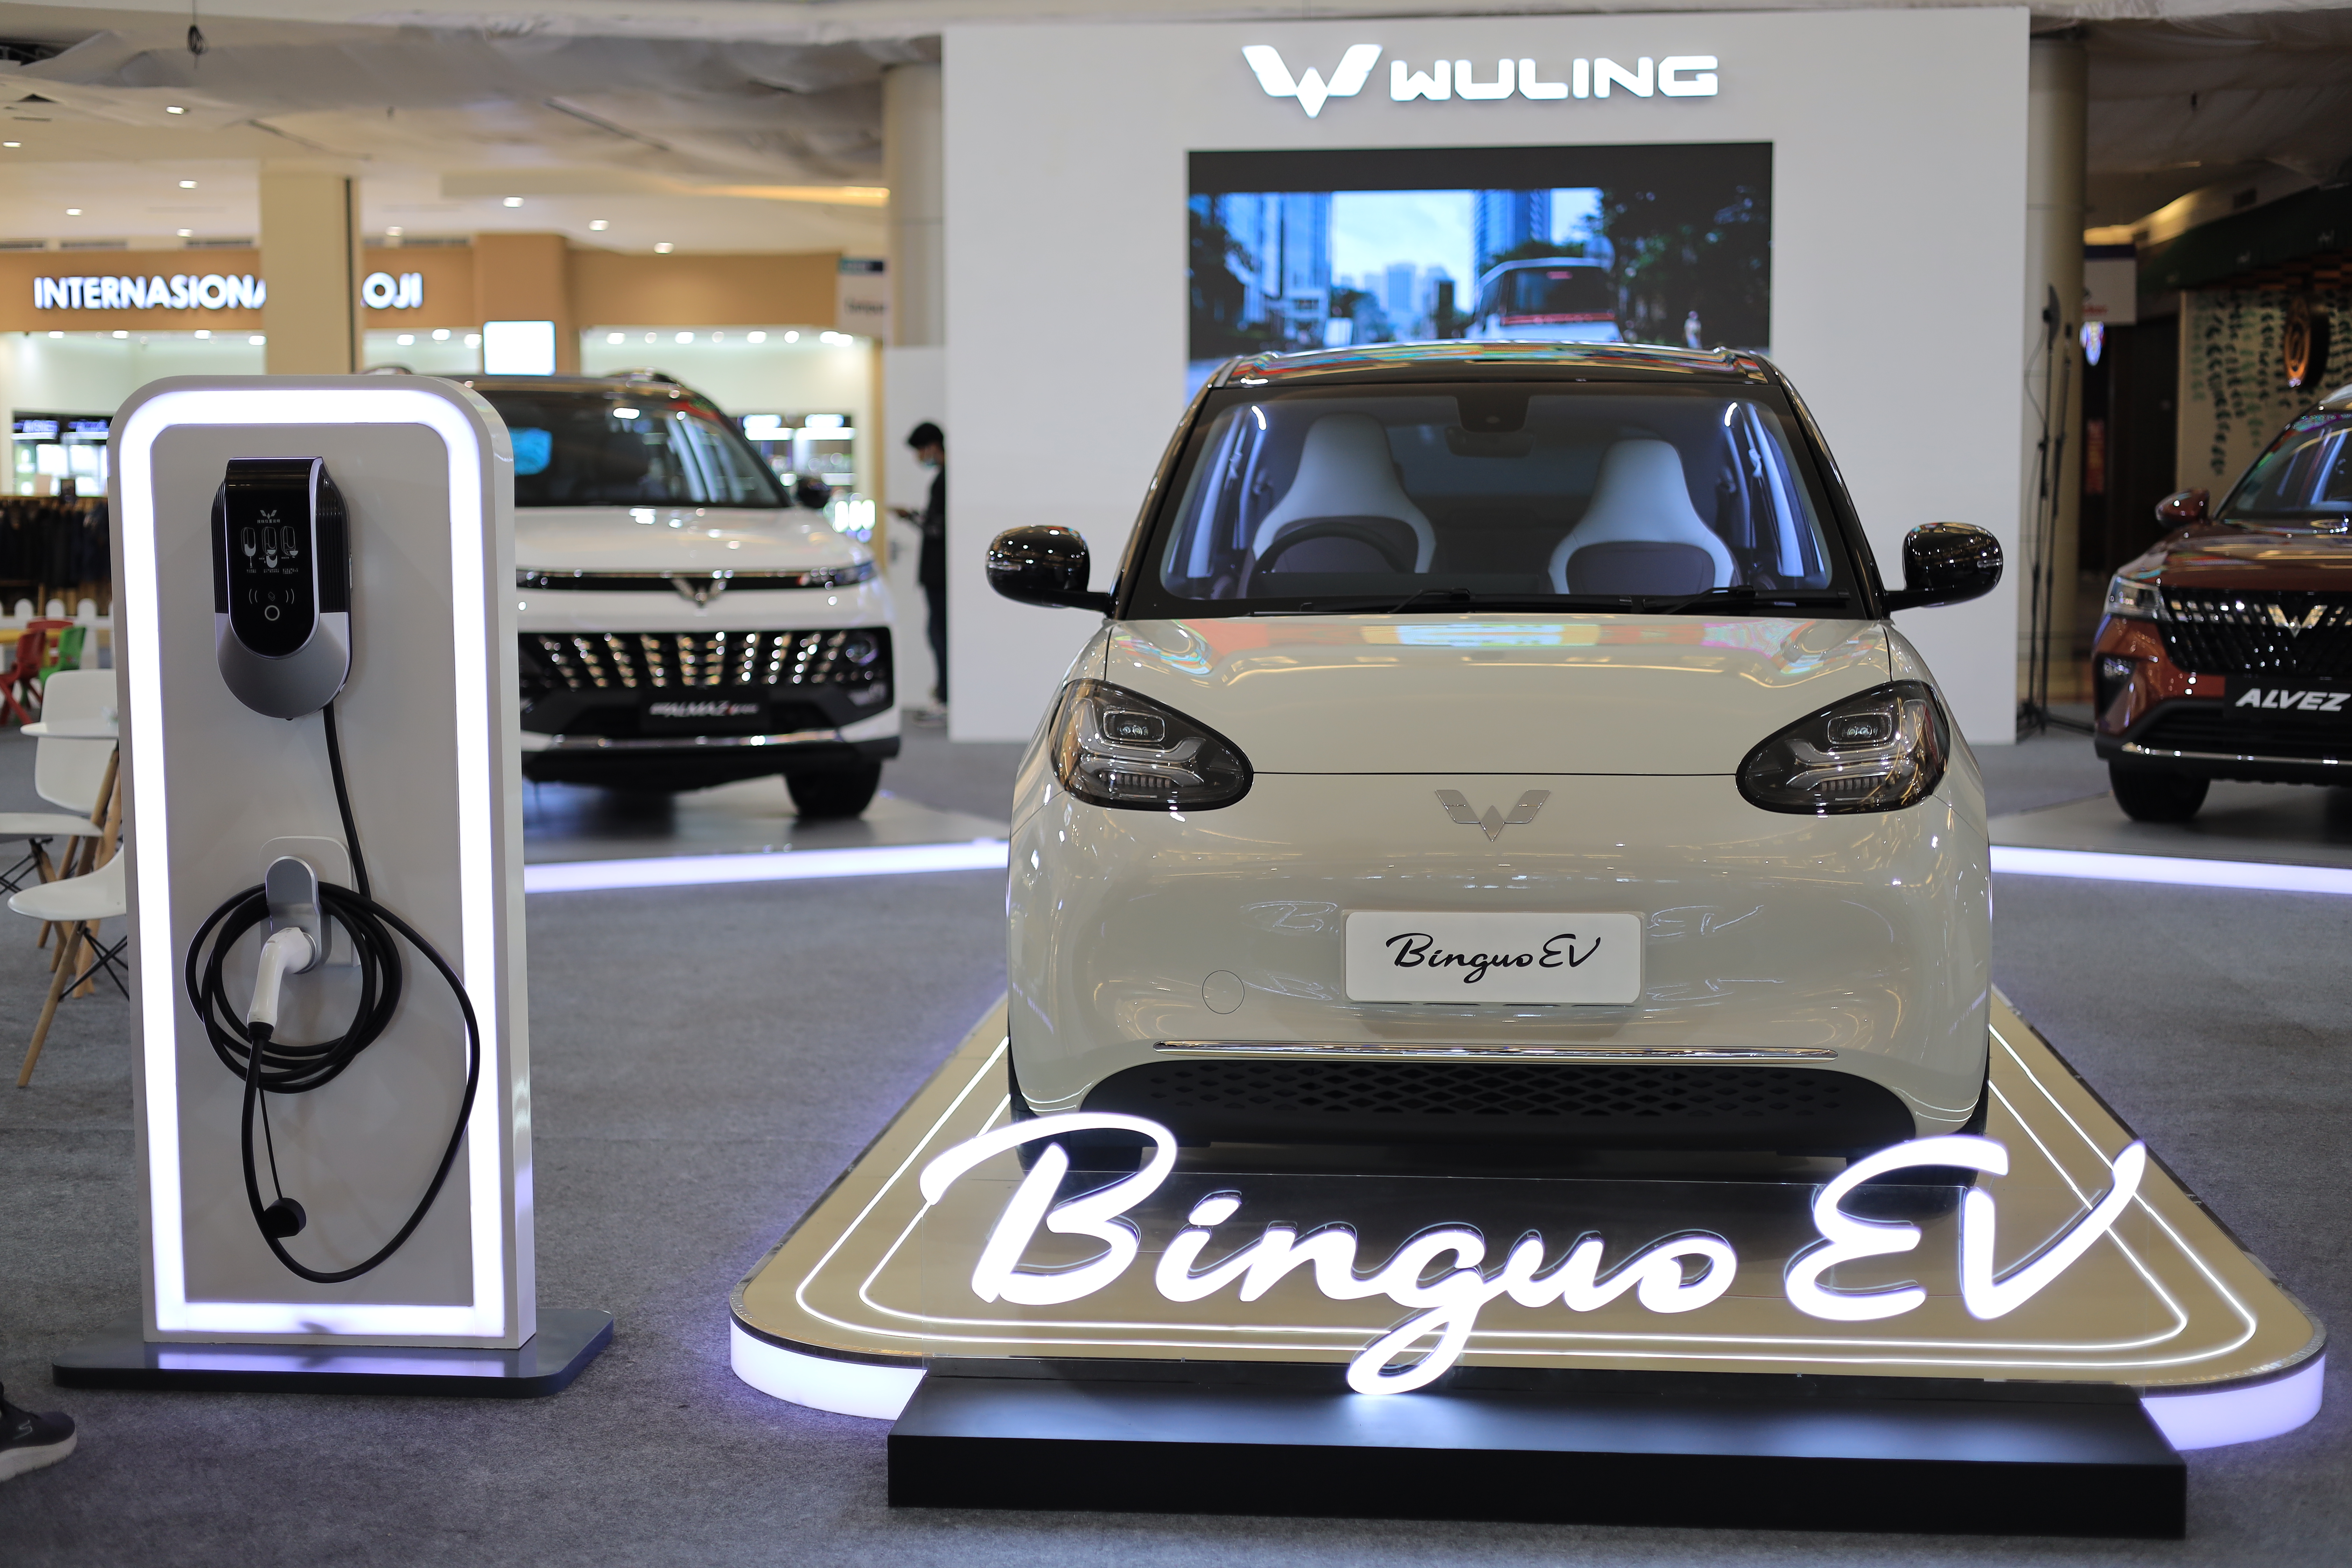 Image Wuling’s Second Electric Car BinguoEV Officially Marketed in Makassar City